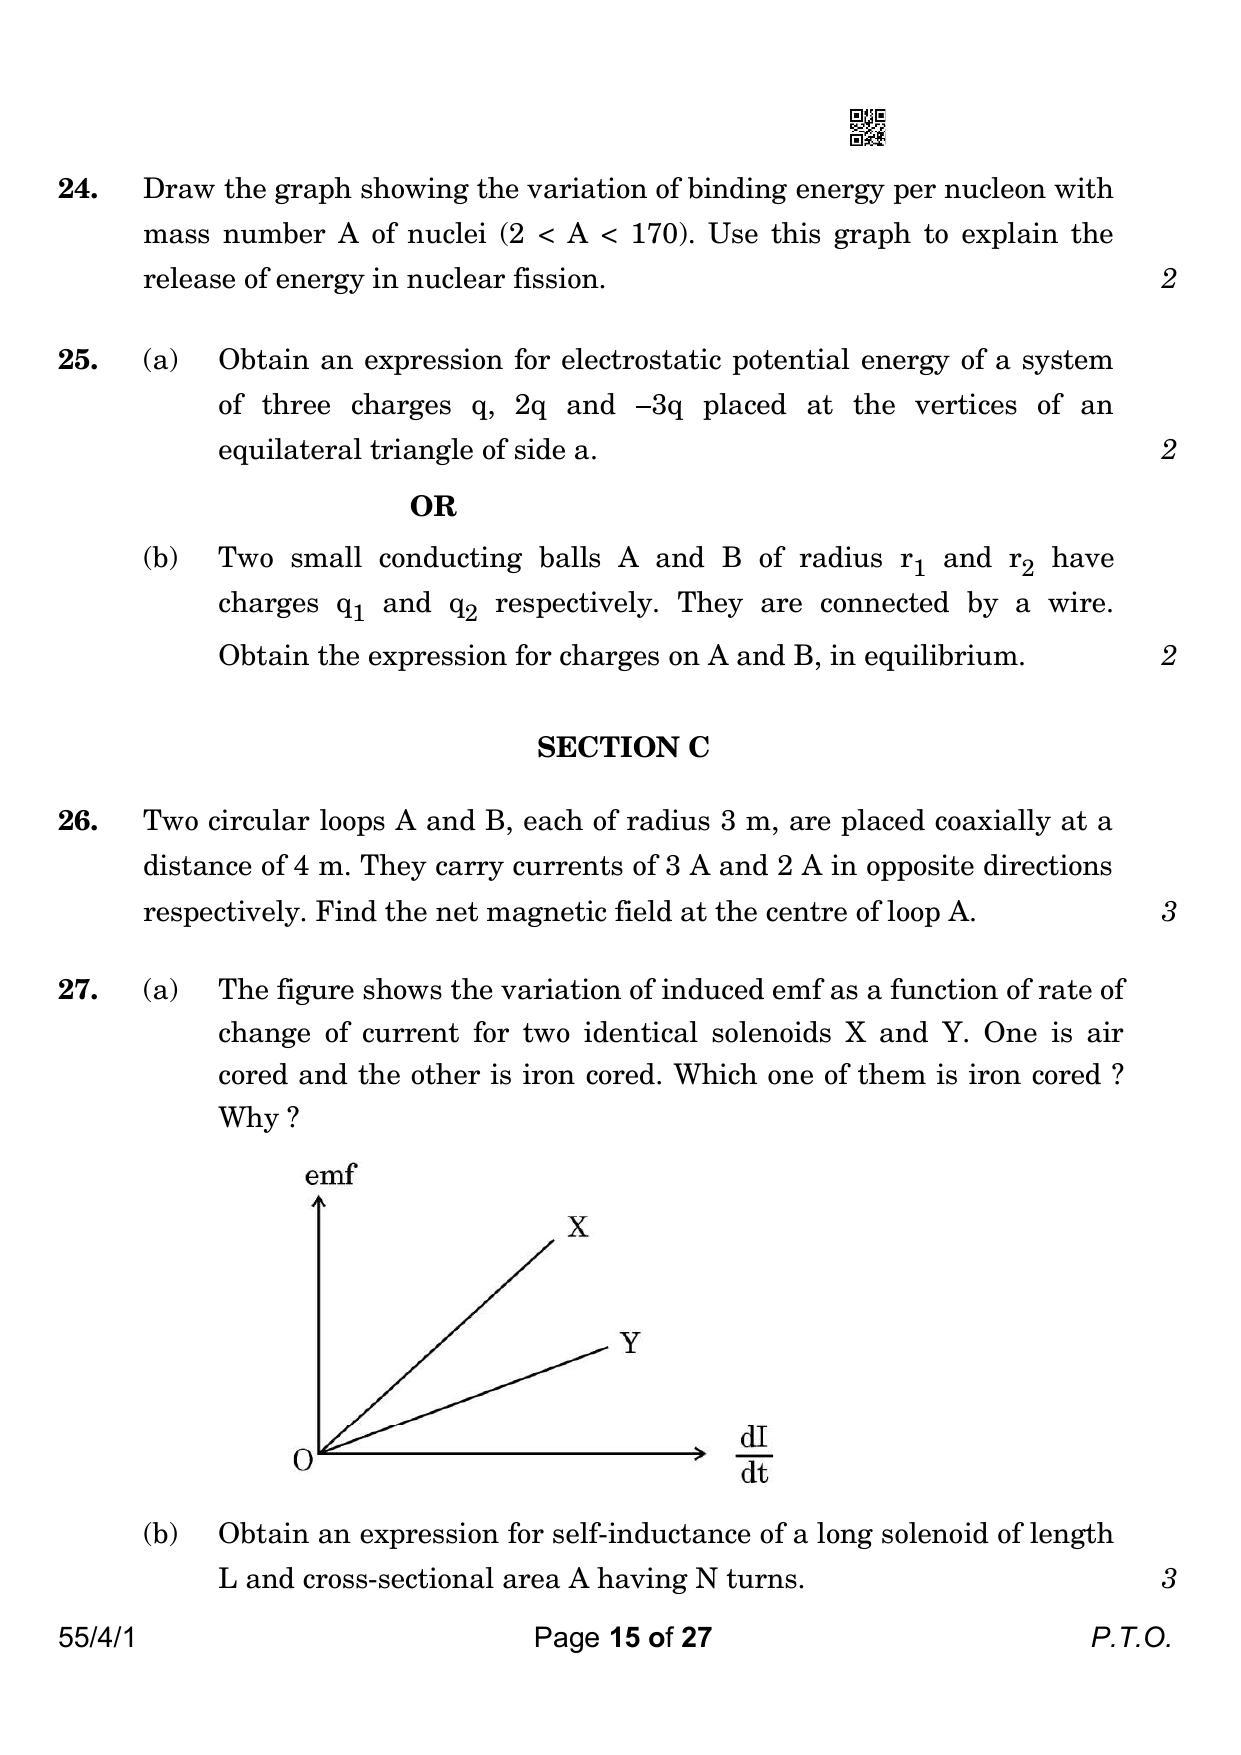 CBSE Class 12 55-4-1 Physics 2023 Question Paper - Page 15